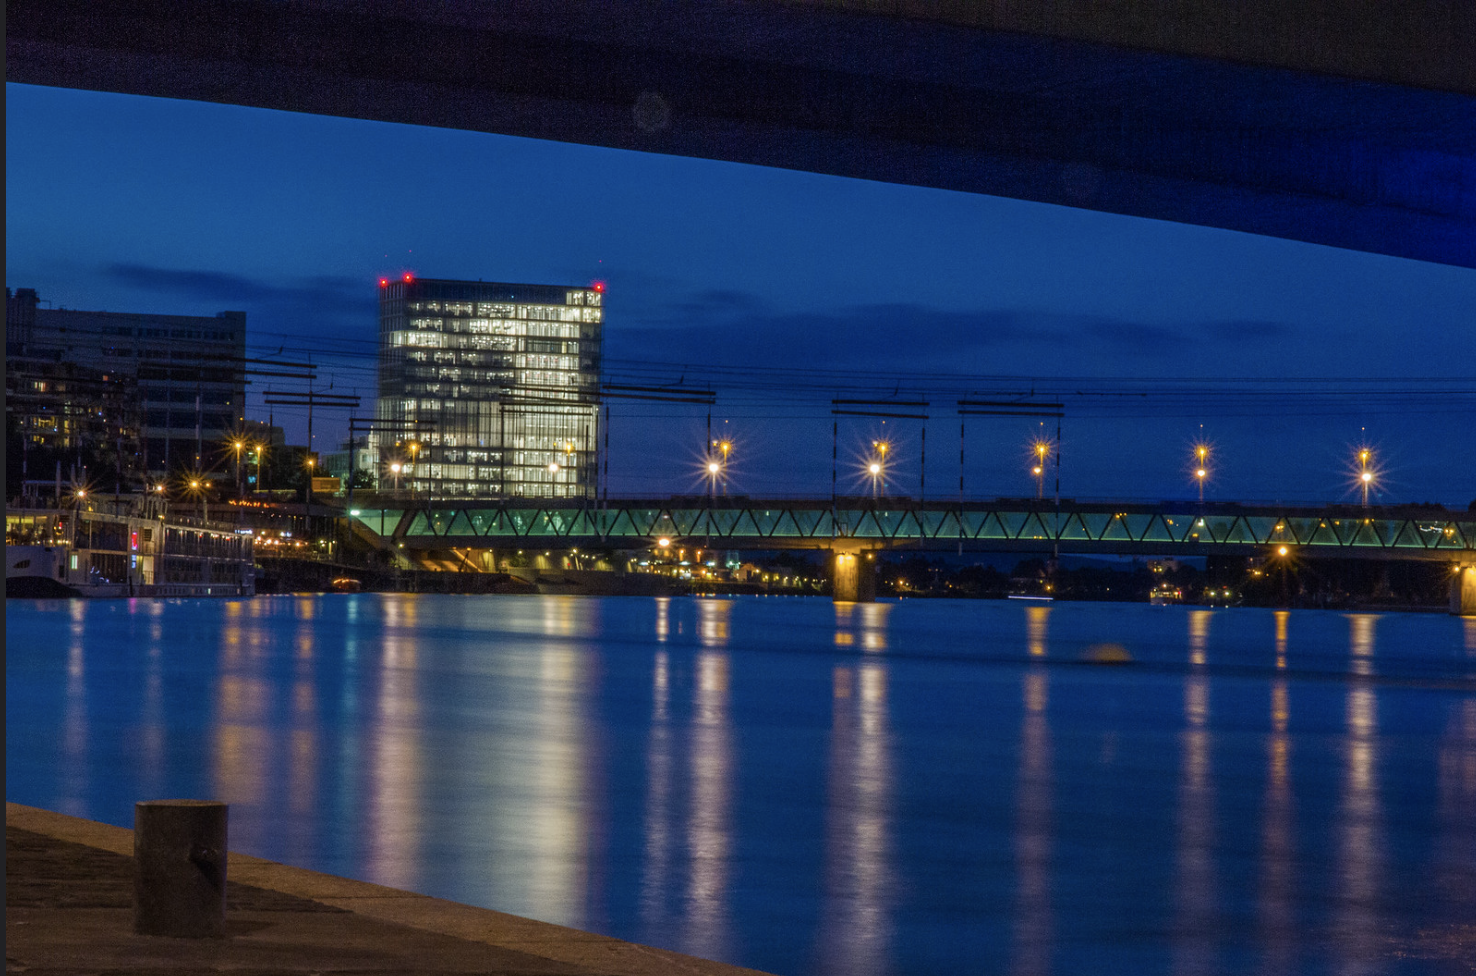 Headquarters of the multinational pharmaceutical company Novartis on the Rhine River in Basel, Switzerland, September 6, 2016 (Photo by Elodie M) Creative Commons license via Flickr